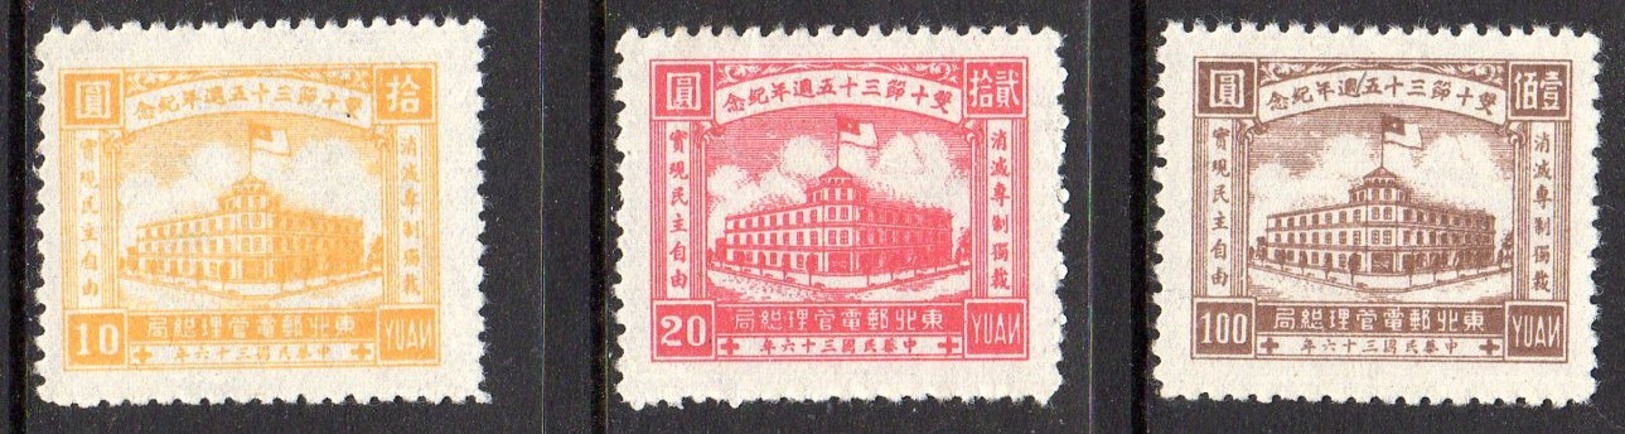 1947 Double Ten’ MNH Set Very Fine Yang NE93-5 Privately Barely Offered Anymore &  CERTIFICATE (NE-29) - Noordoost-China 1946-48